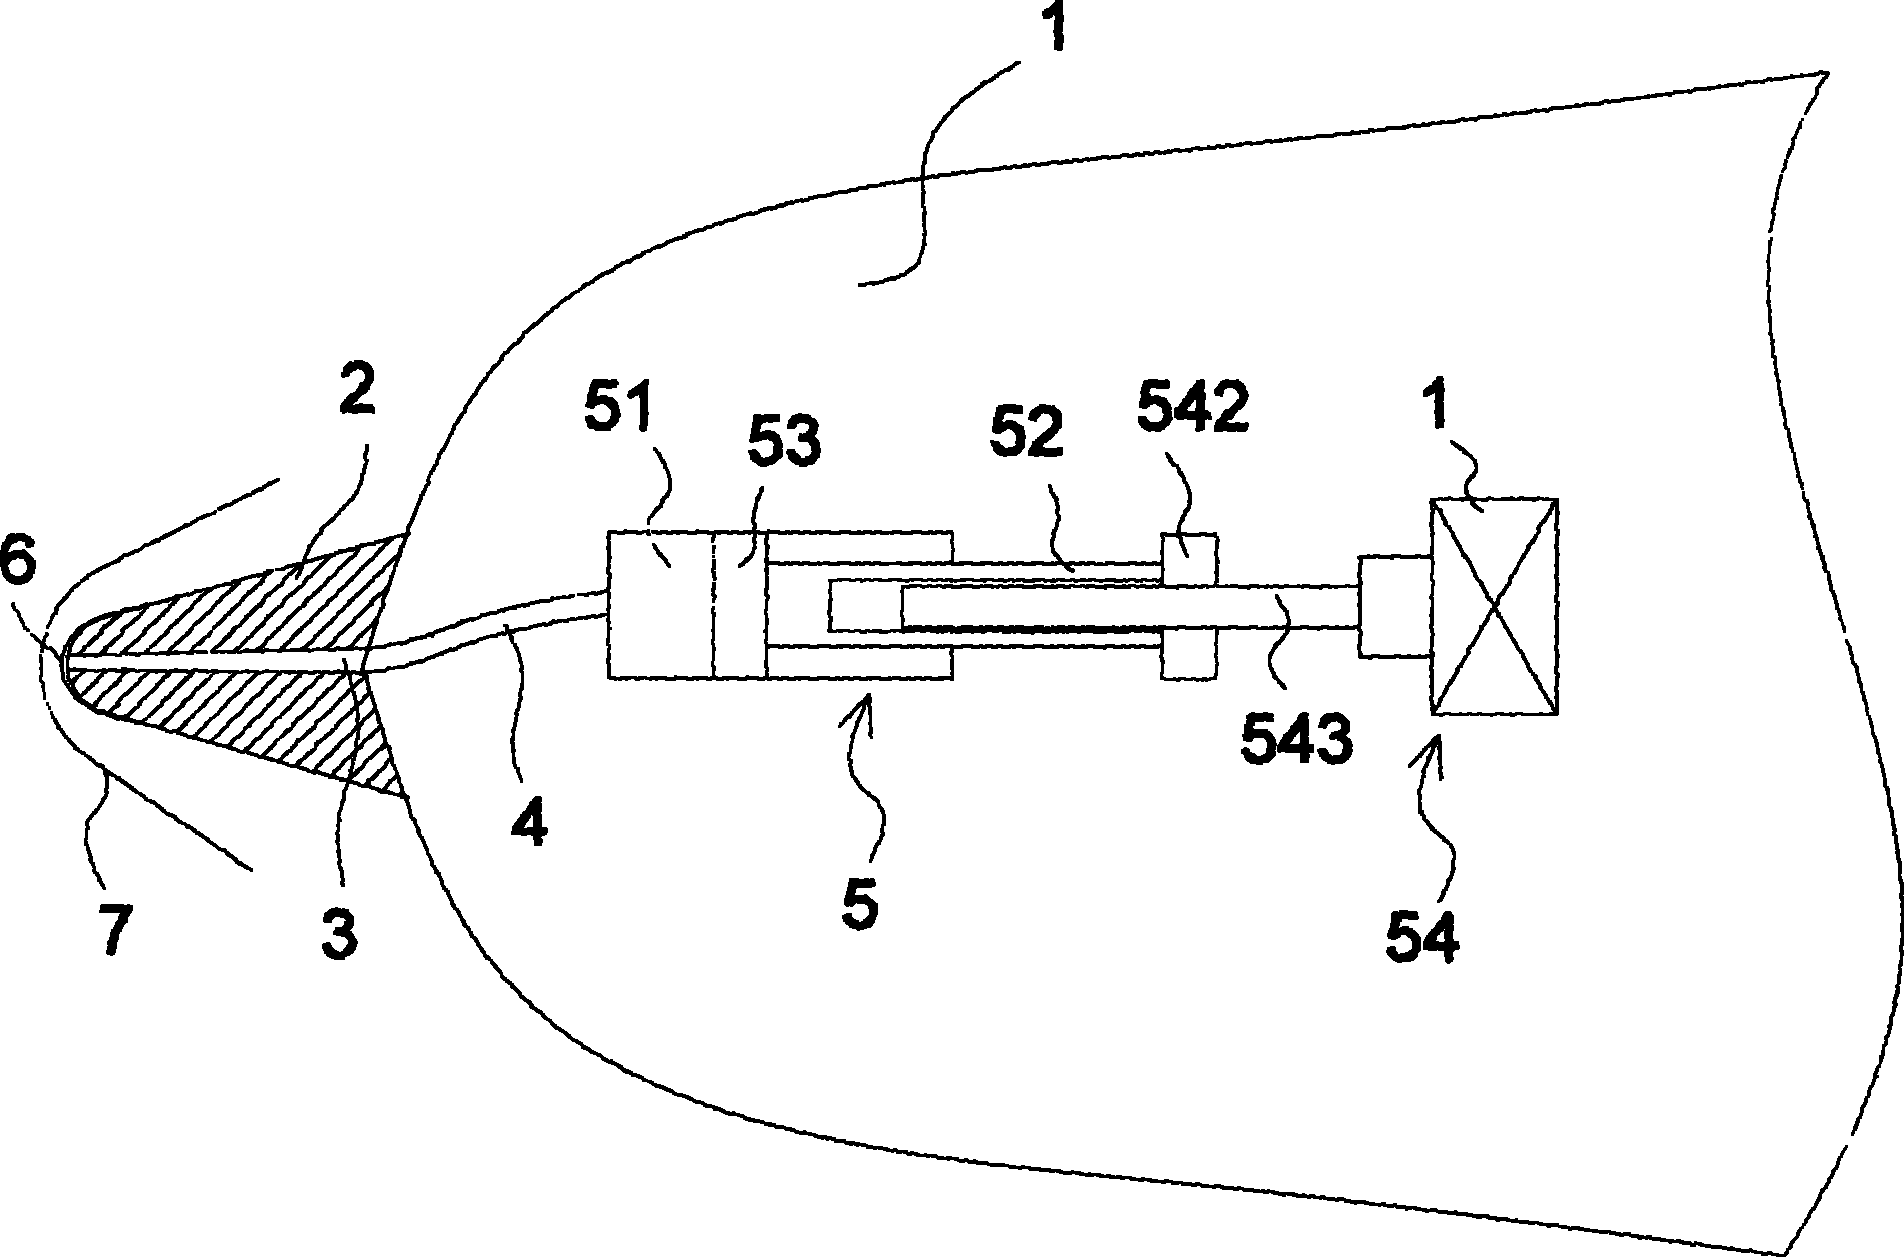 Experimental device for reducing heat flow rate by applying local reverse overflow of aircraft